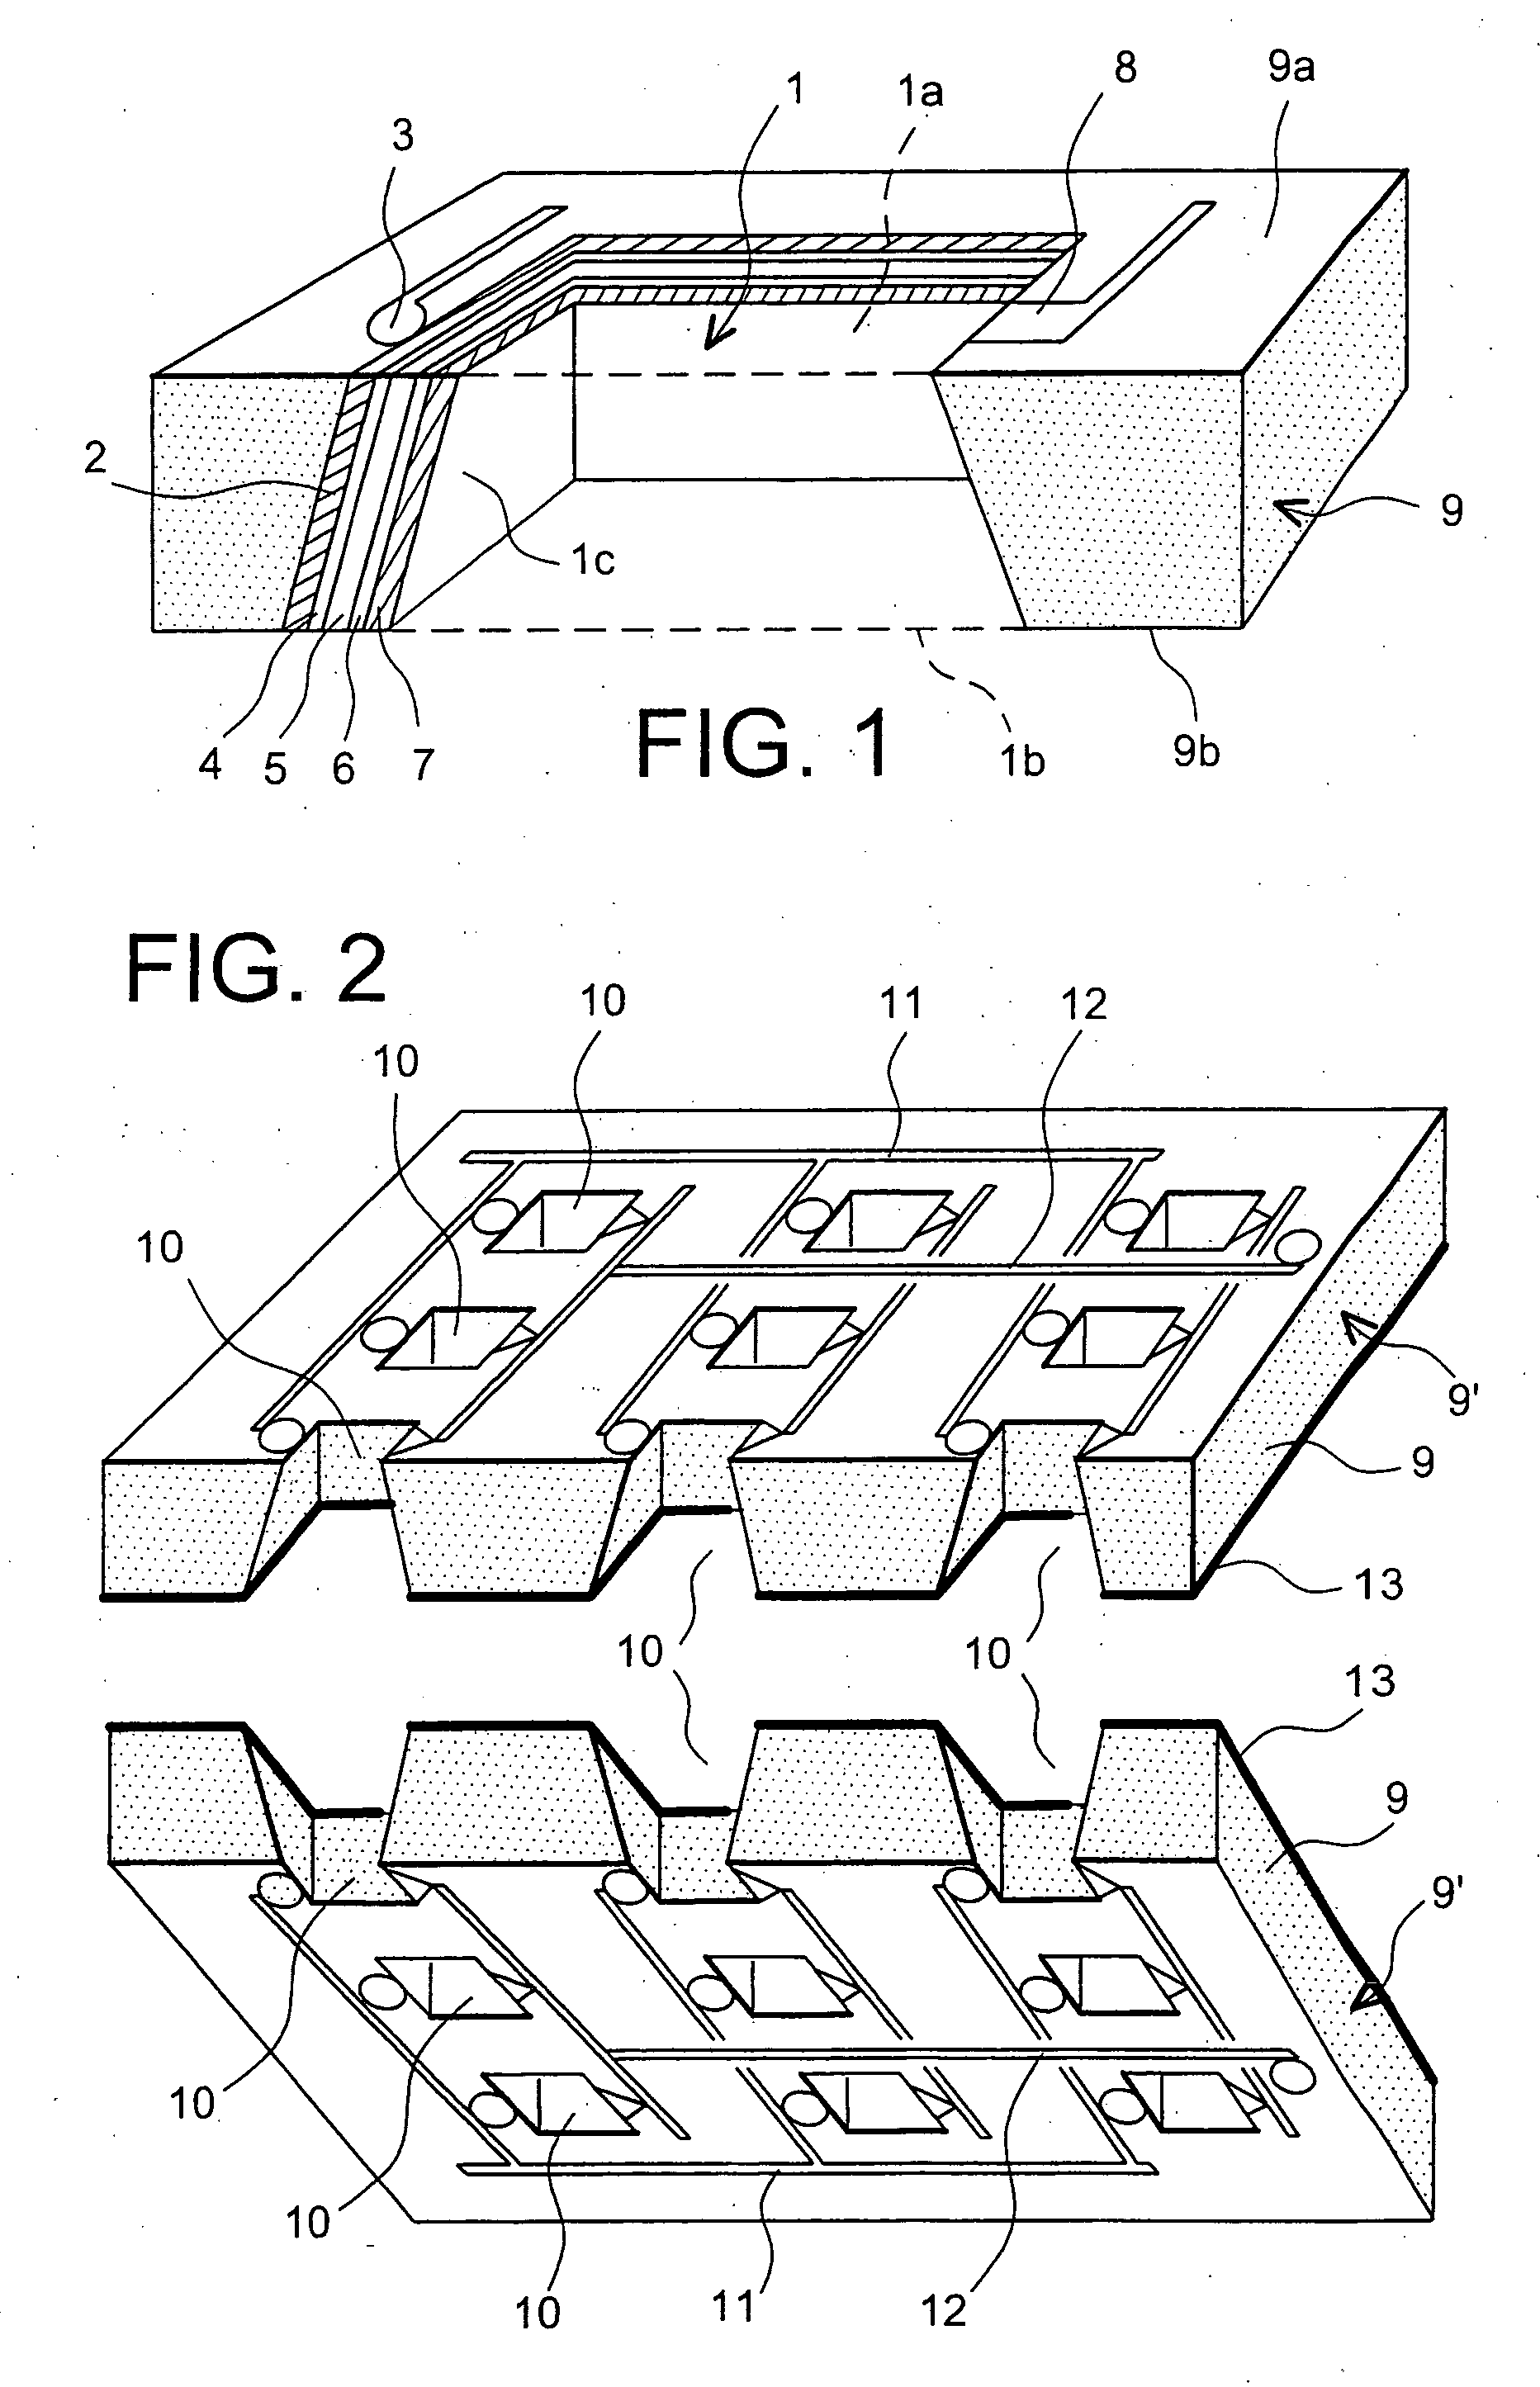 Method for making a fuel cell with large active surface and reduced volume